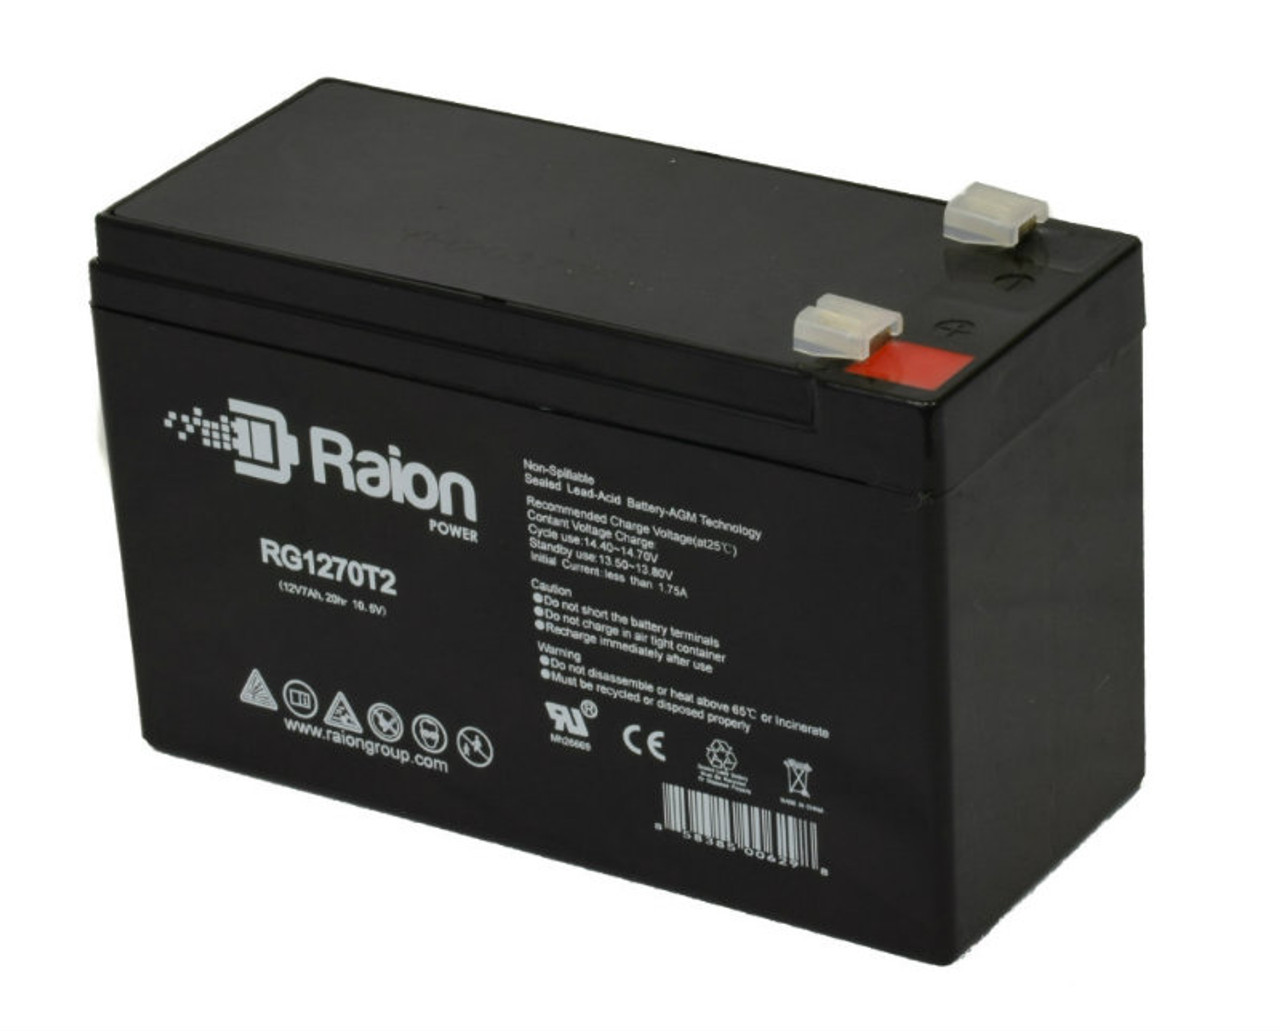 Raion Power Replacement 12V 7Ah RG1270T1 Fire Alarm Battery for Altronix SMP5PMCTXPD4